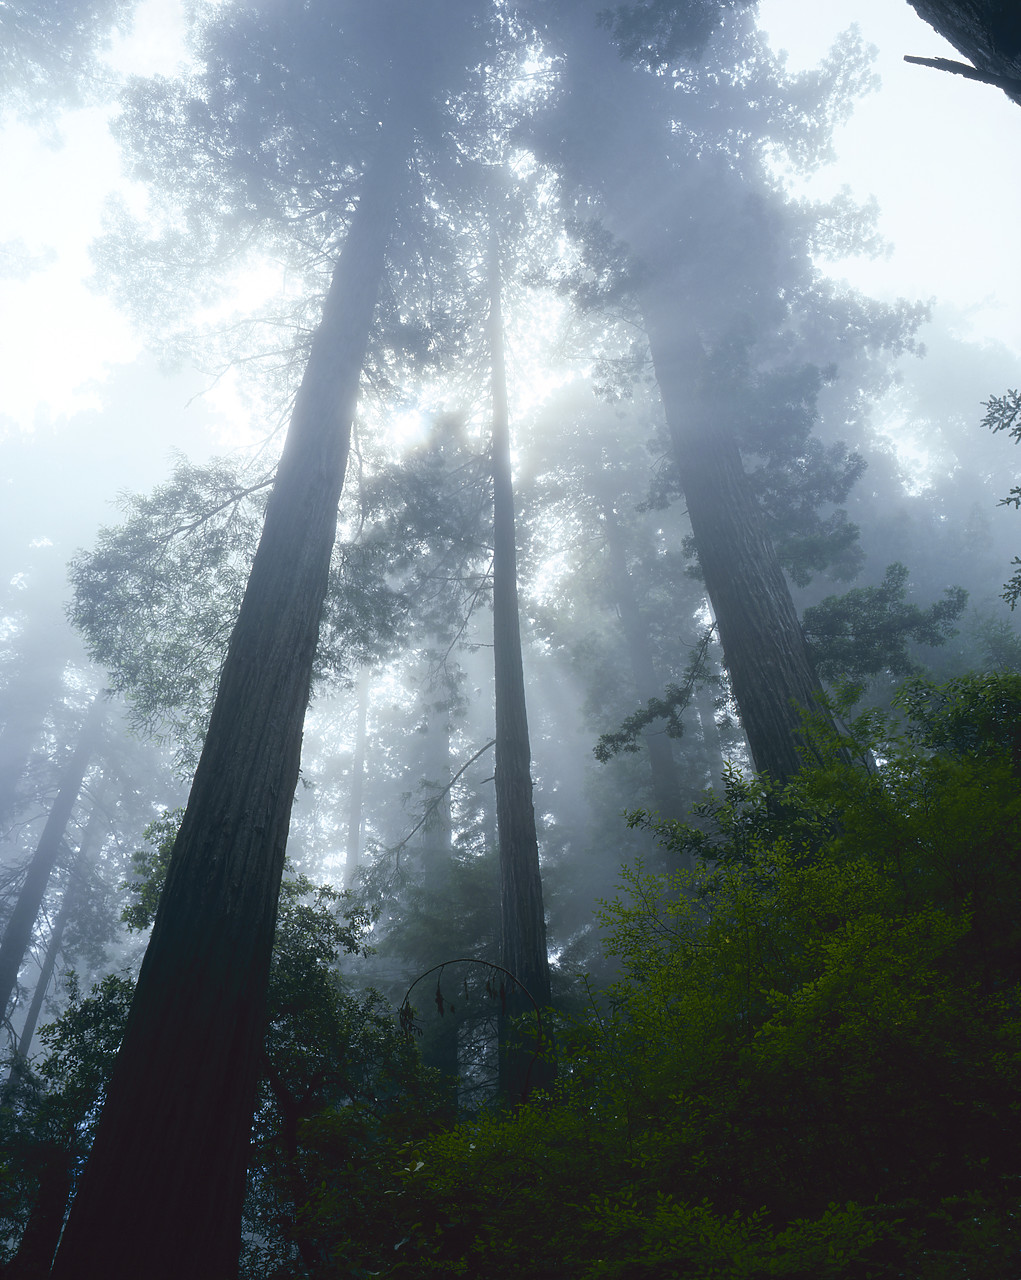 #83154 - Converging Redwoods in Fog, Redwood National Forest, California, USA